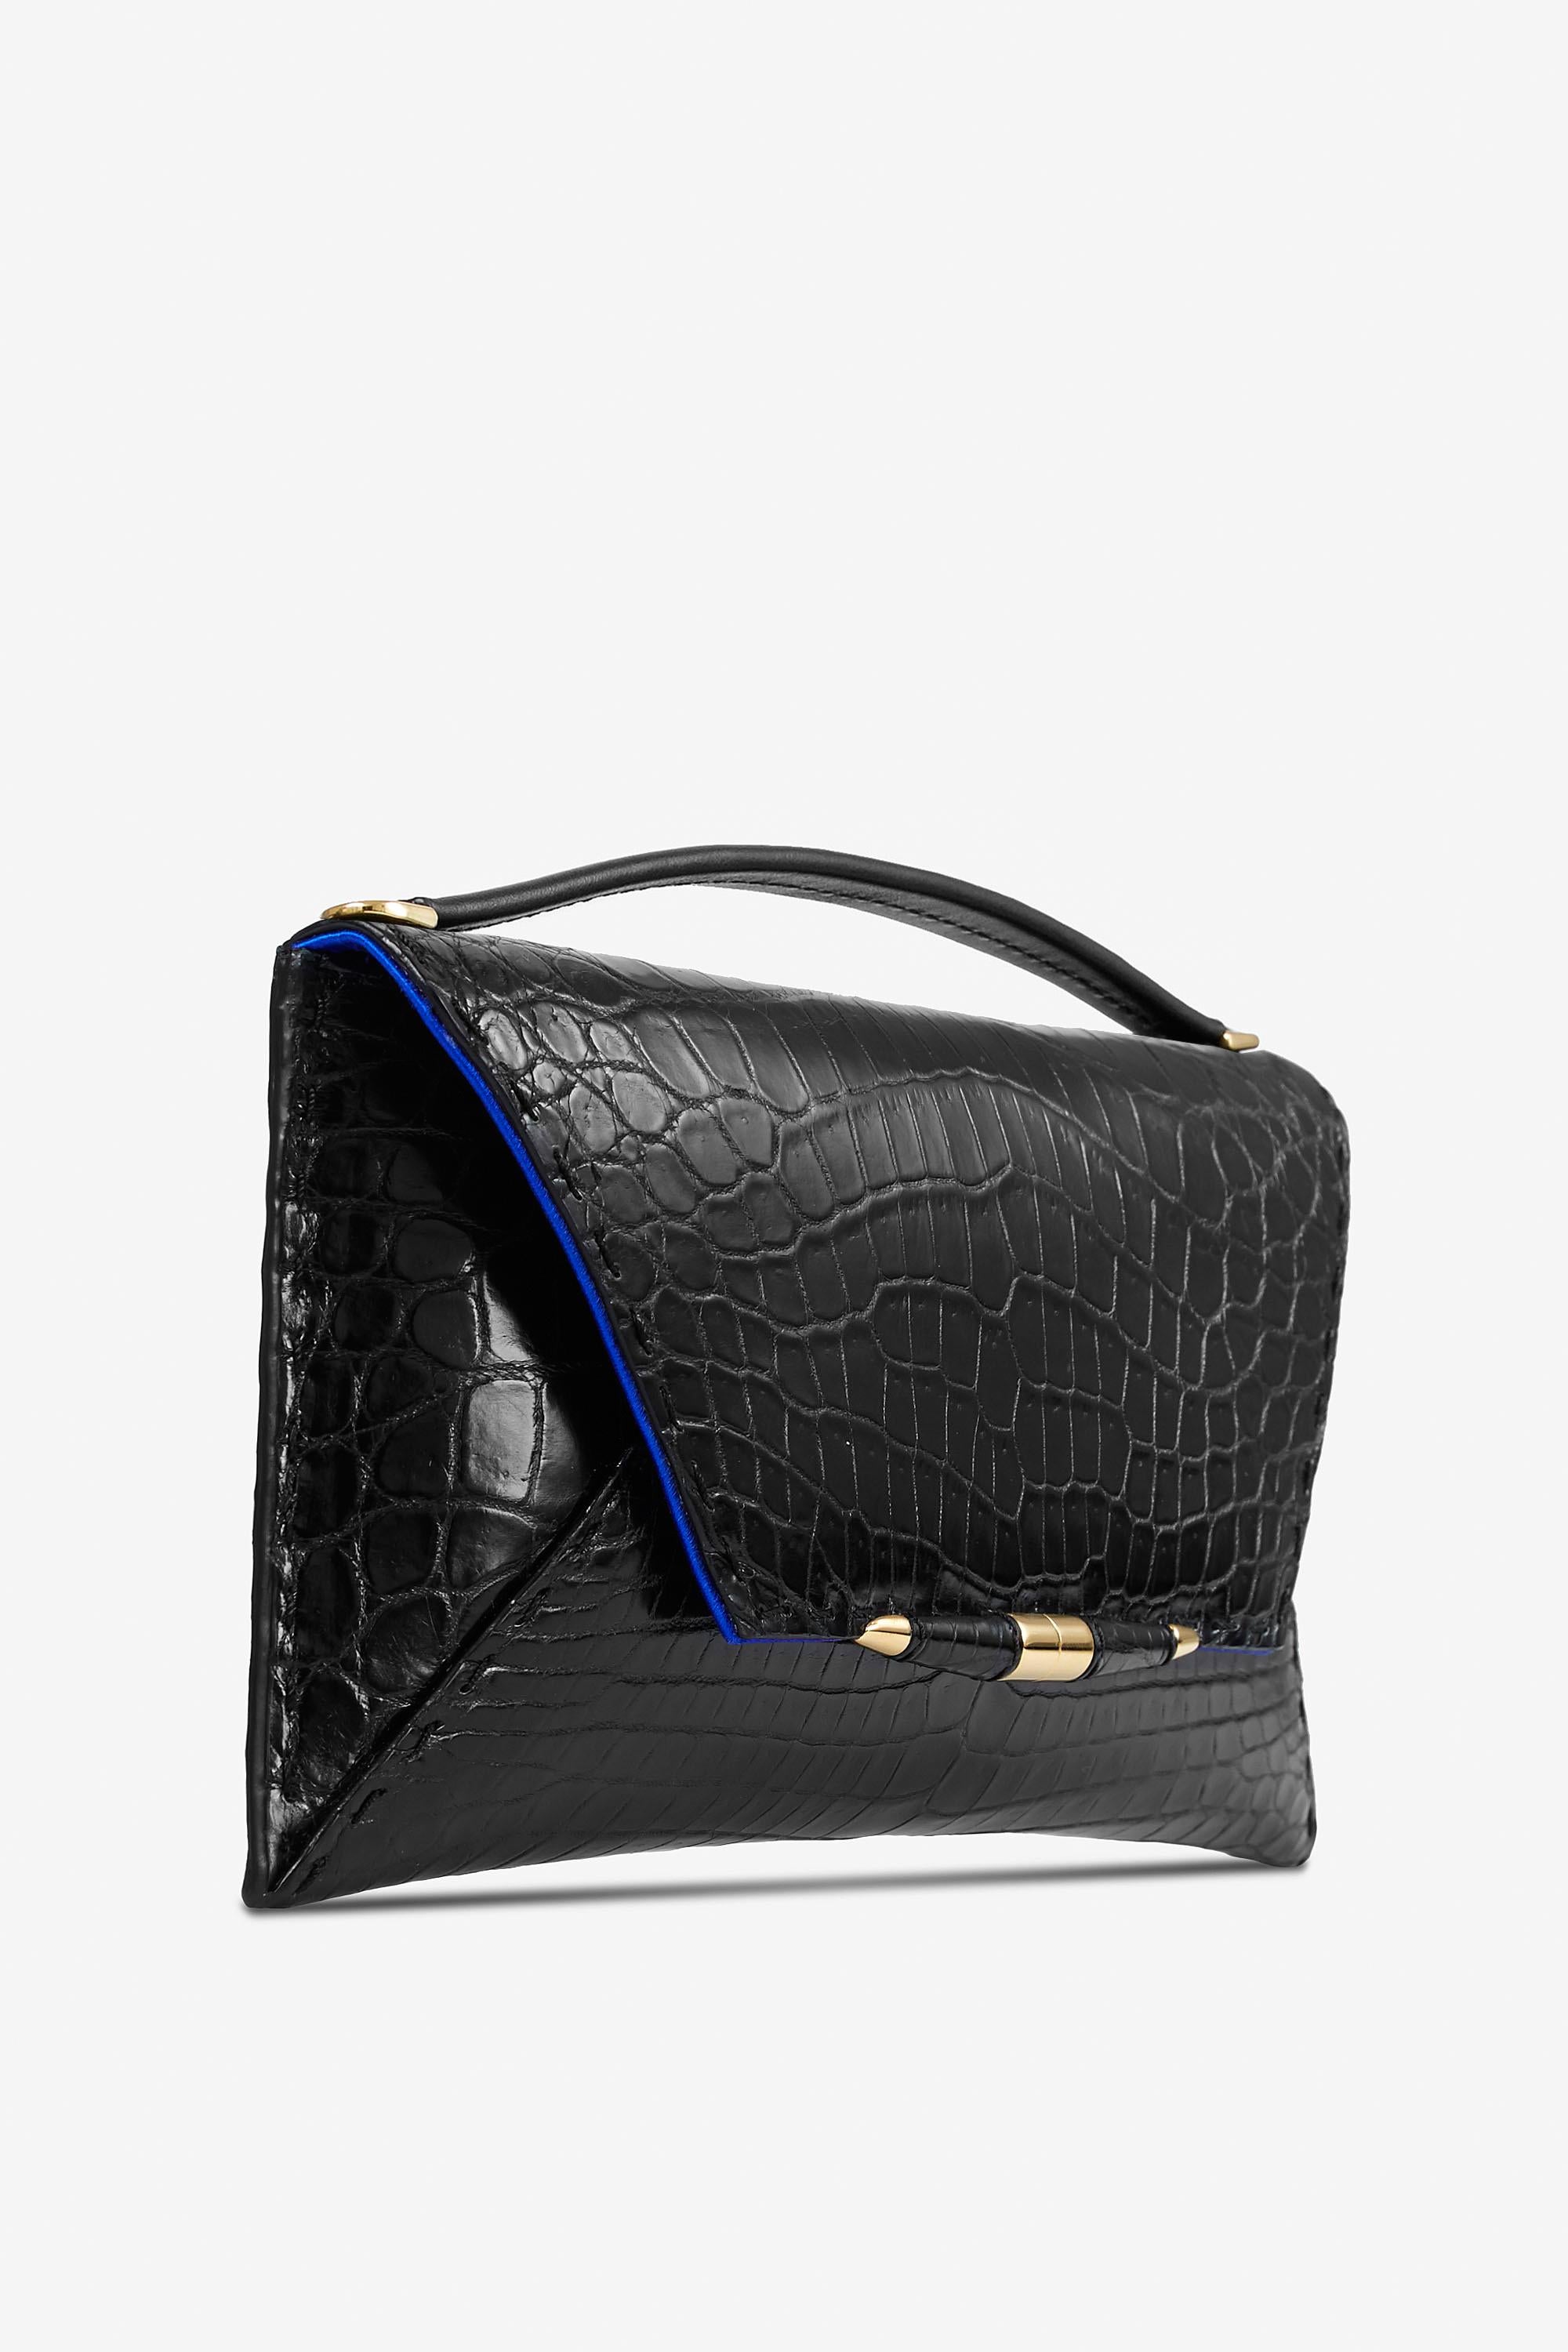 The Aimee Clutch Large Black Noir Crocodile Gold Hardware is designed with a magnetic front flap snap closure, hidden exterior pocket and a detachable cross-body Black Alligator strap. It features our custom infinity bar closure and signature Thayer